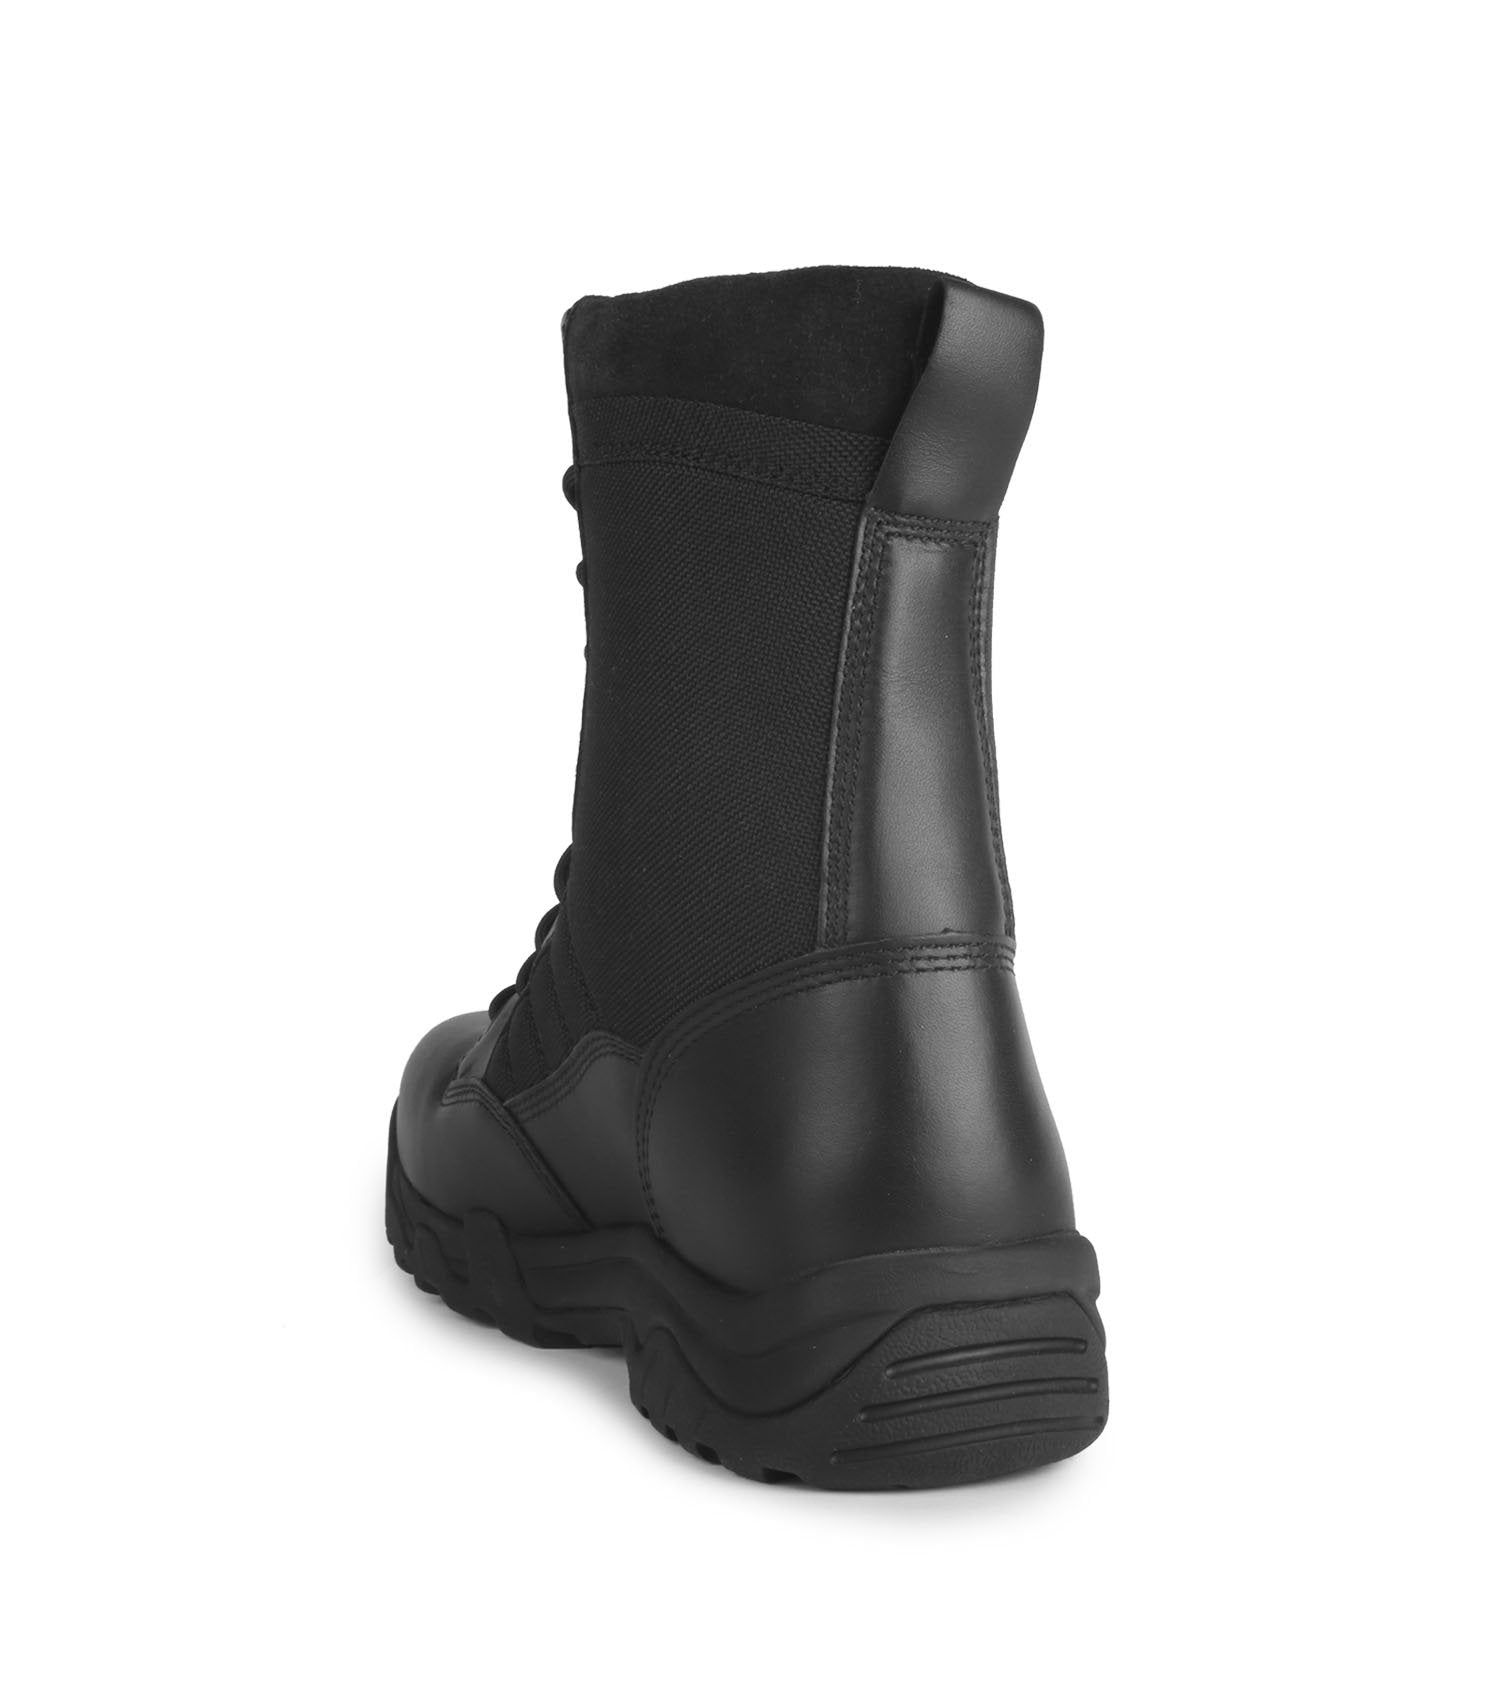 STC 10-4 Men's 8" Lightweight Leather/1000D Nylon Tactical Boots | Black | Sizes 4 - 15 Work Boots - Cleanflow